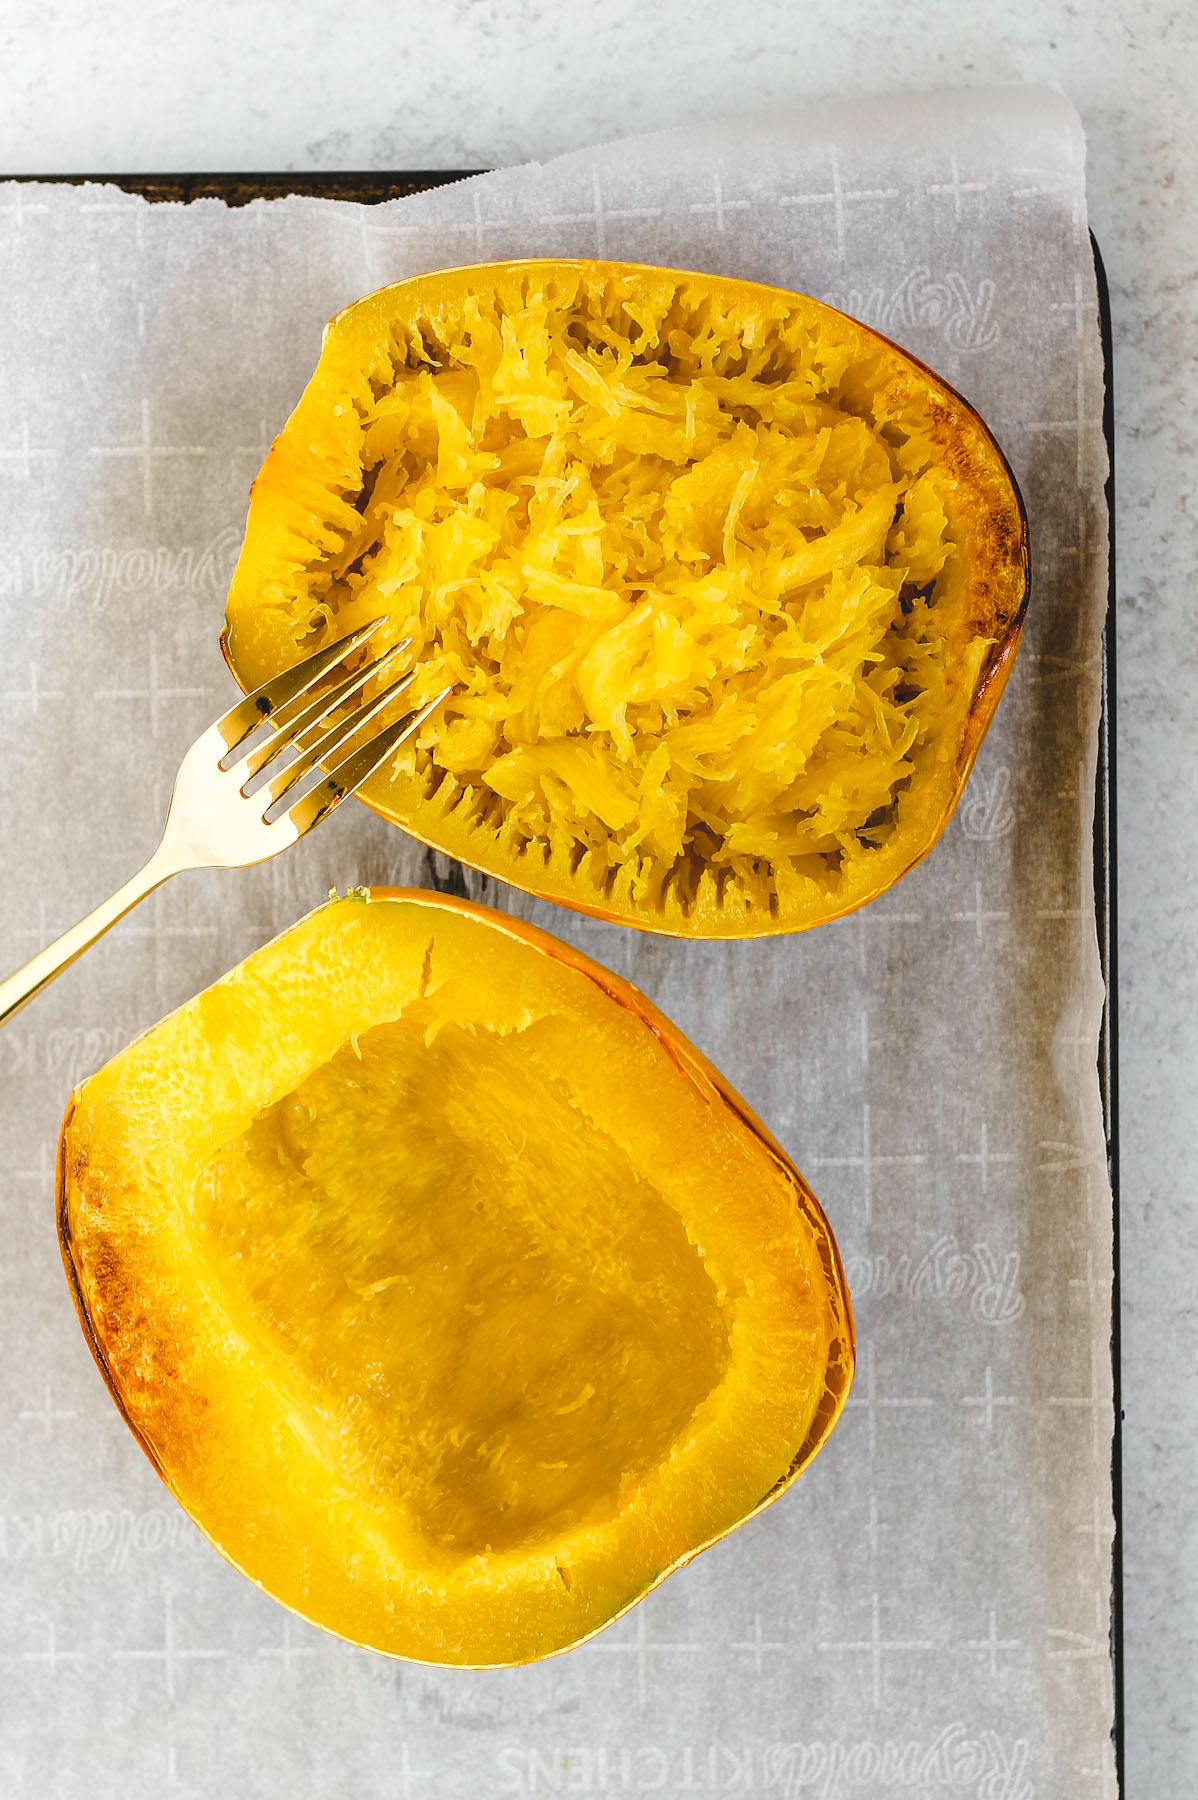 2 roasted spaghetti squash halves - one half has the the squash scraped with a fork showing the spaghetti squash "noodles". 